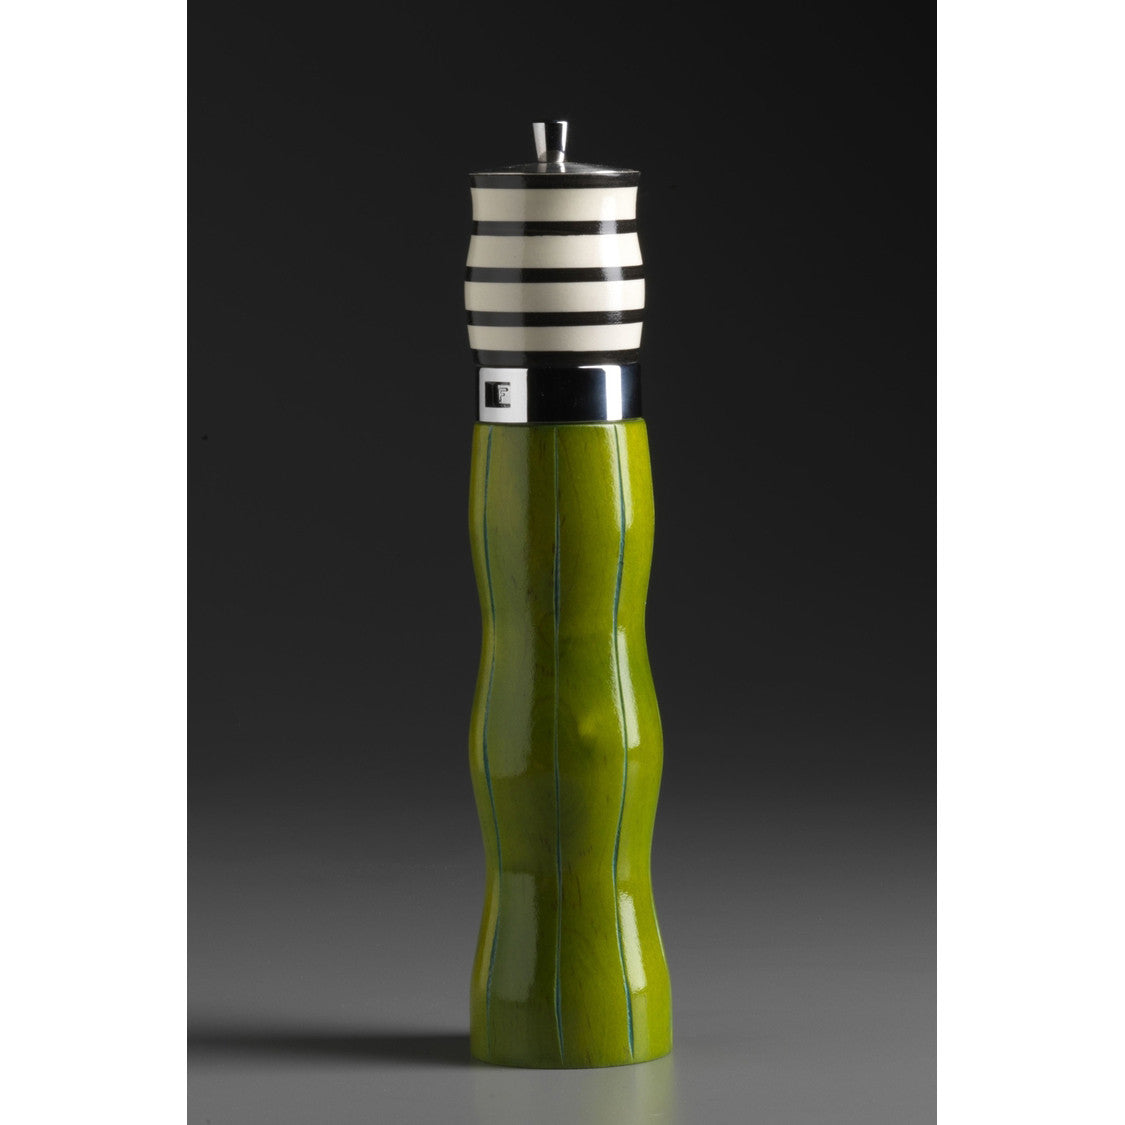 https://www.sweetheartgallery.com/cdn/shop/products/Raw-Design-Green-Black-and-White-Wooden-Salt-Shaker-and-Pepper-Mill-Combo-C-5-by-Robert-Wilhelm-Artistic-Designer-Salt-and-Pepper-Shakers.jpeg?v=1590333577